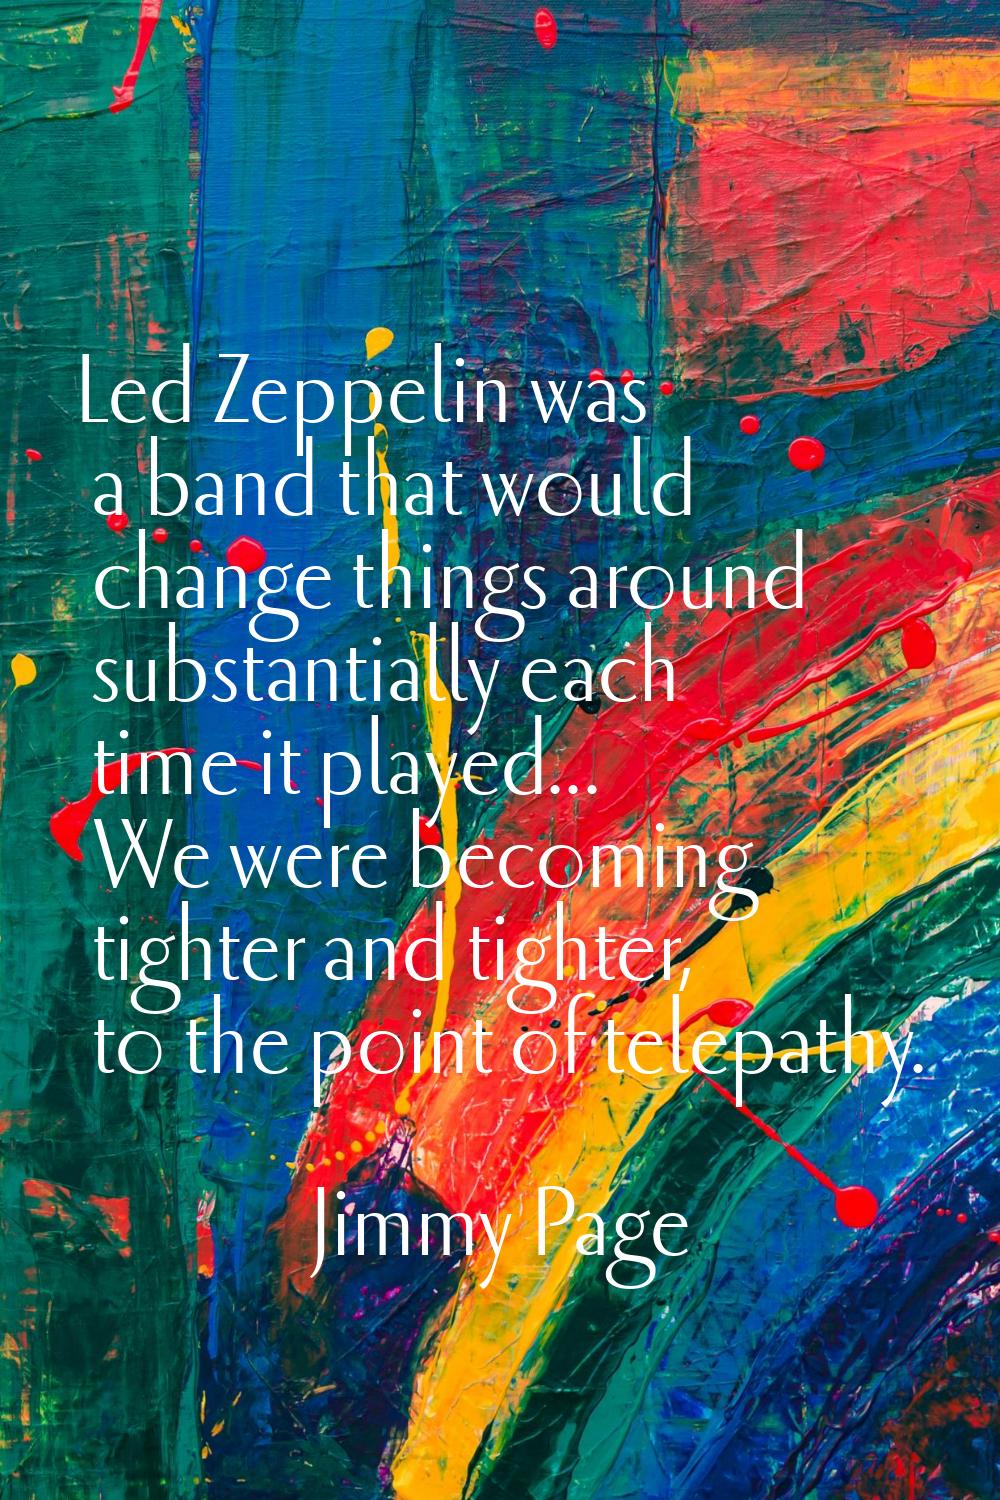 Led Zeppelin was a band that would change things around substantially each time it played... We wer